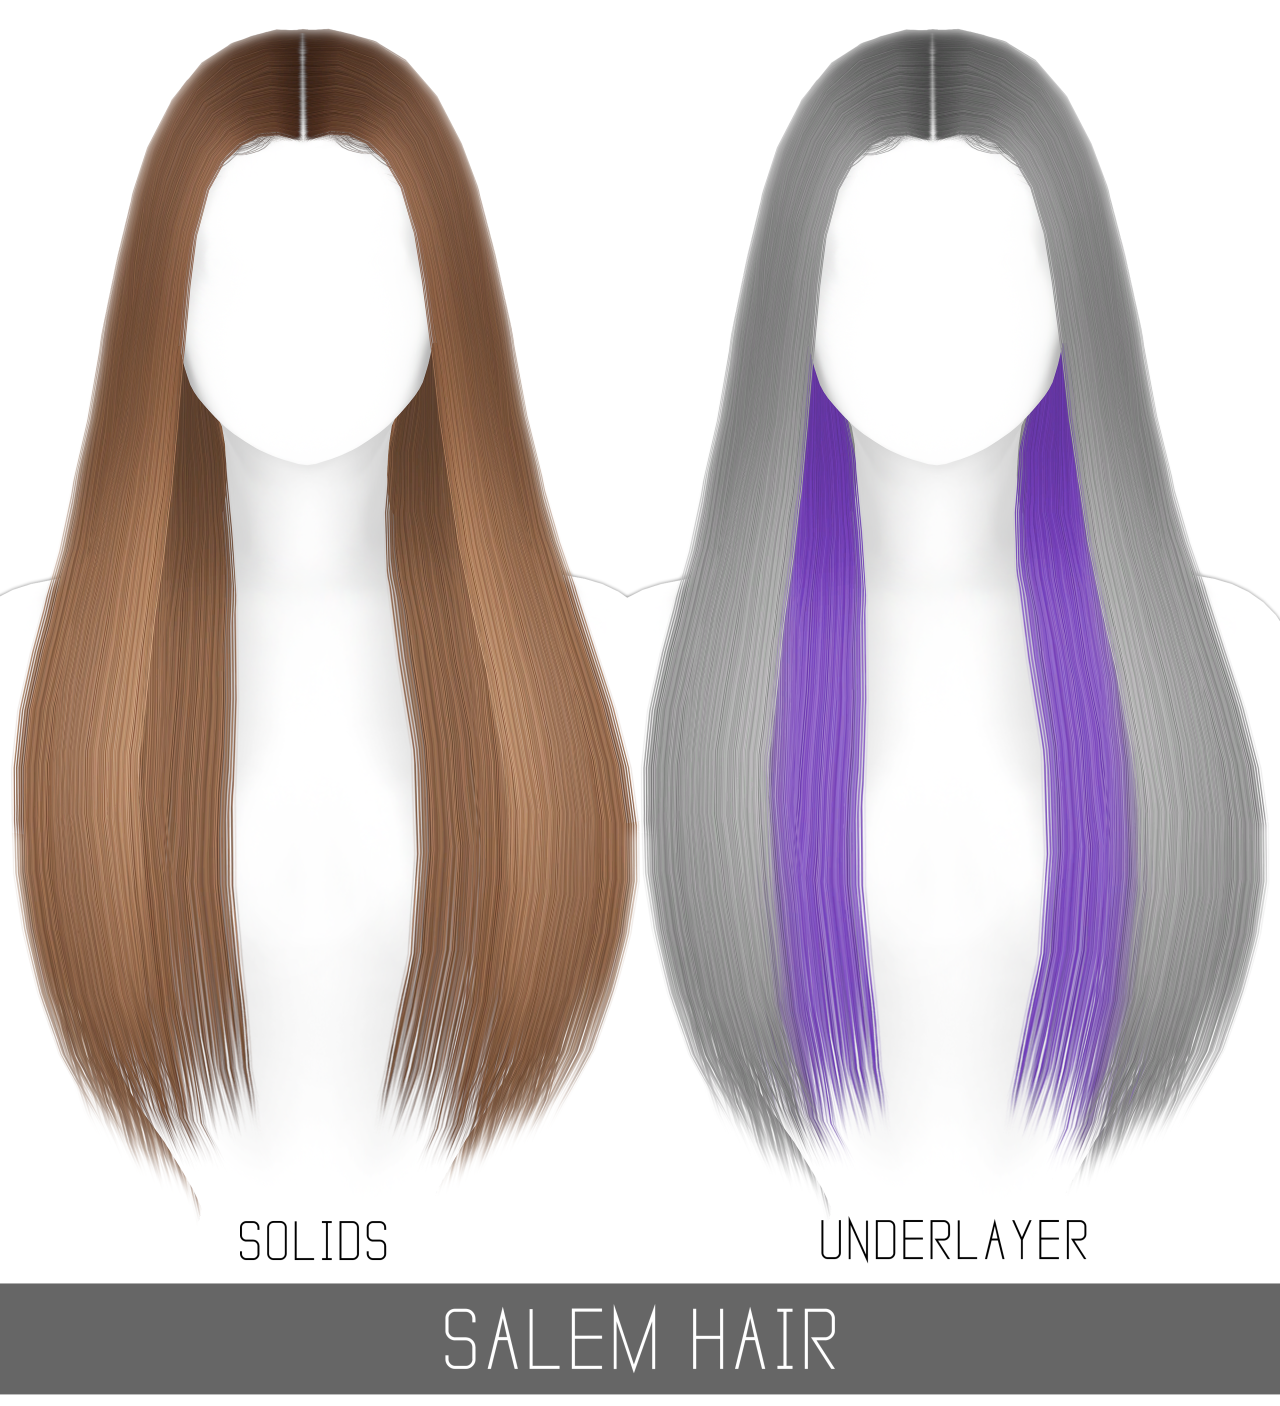 Simpliciaty] — SALEM HAIR + TODDLER & CHILD + TWO TONE 👻 Long...